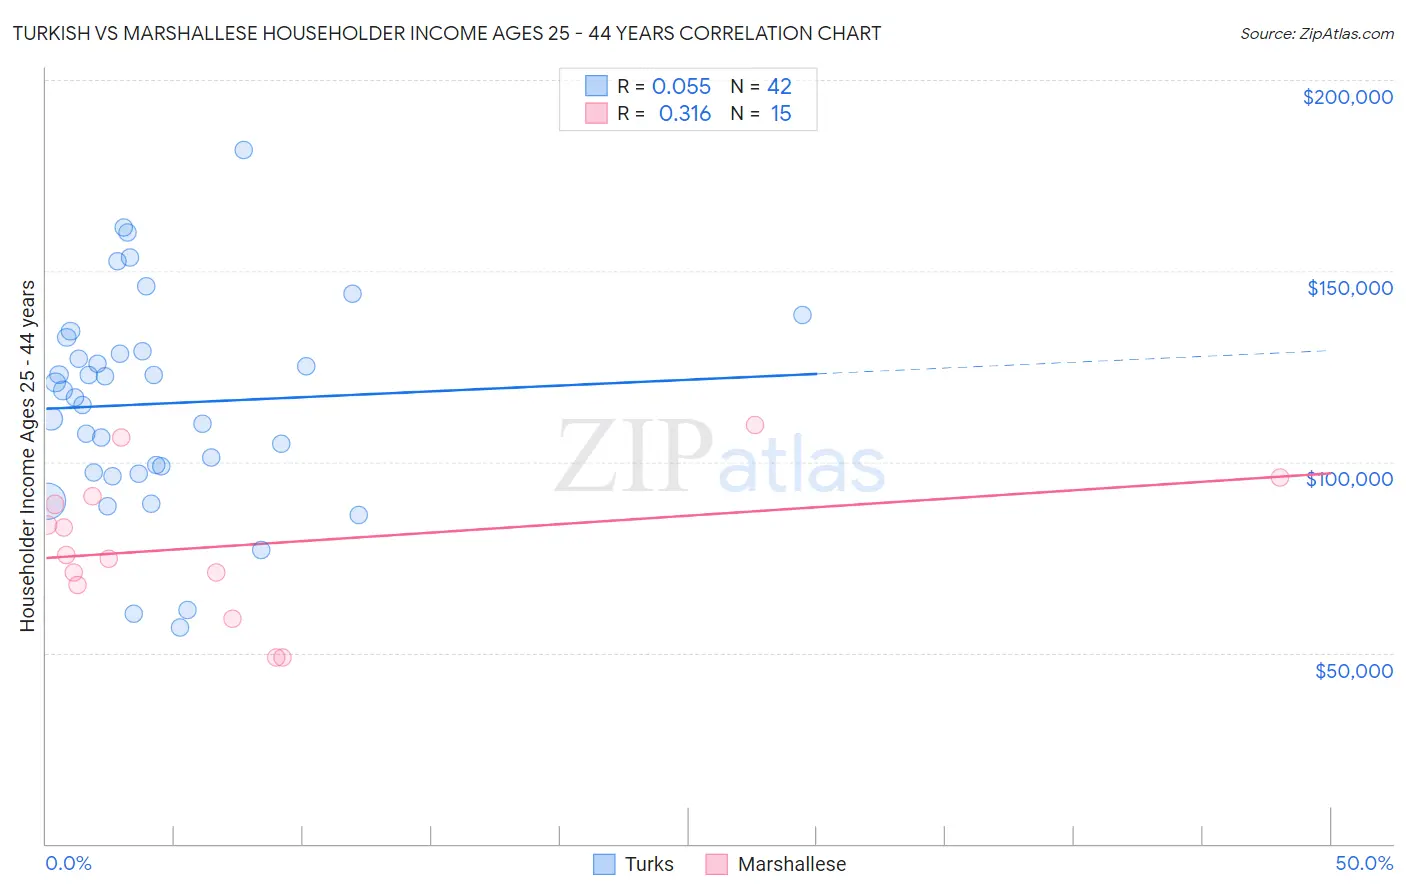 Turkish vs Marshallese Householder Income Ages 25 - 44 years